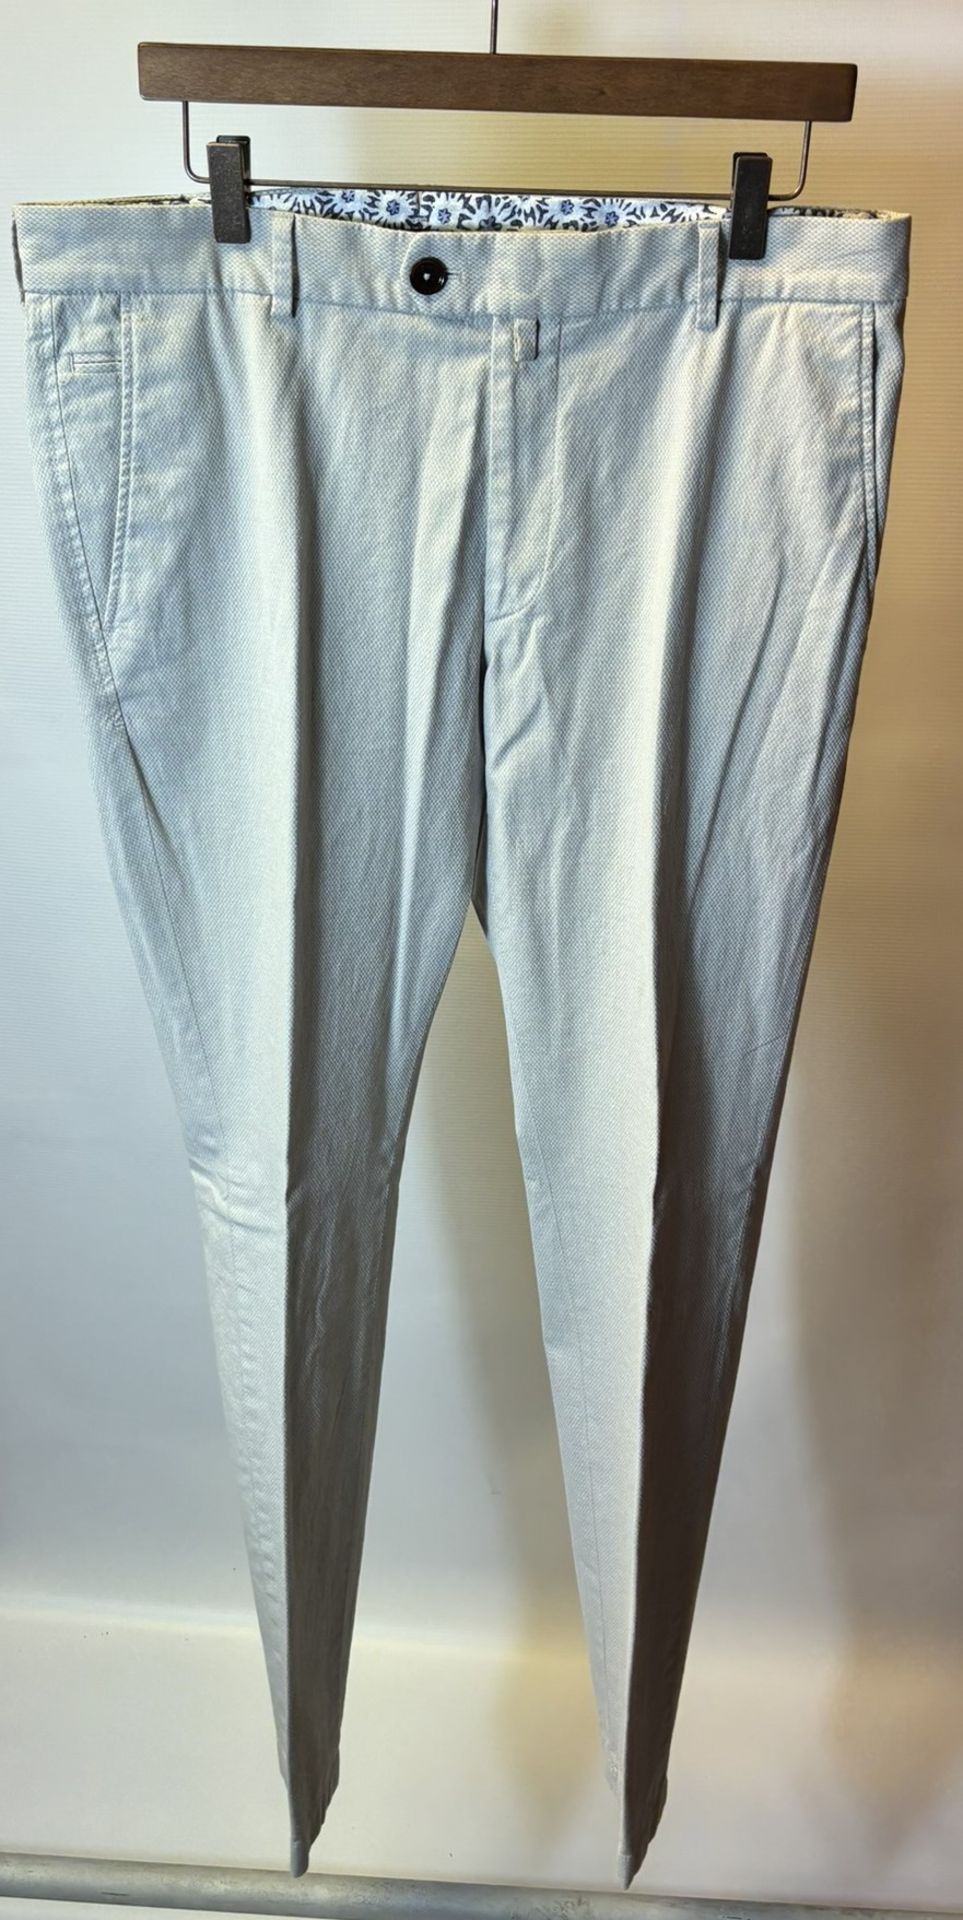 15 x Various Pairs Of Women's Trousers As Seen In Photos - Image 28 of 45